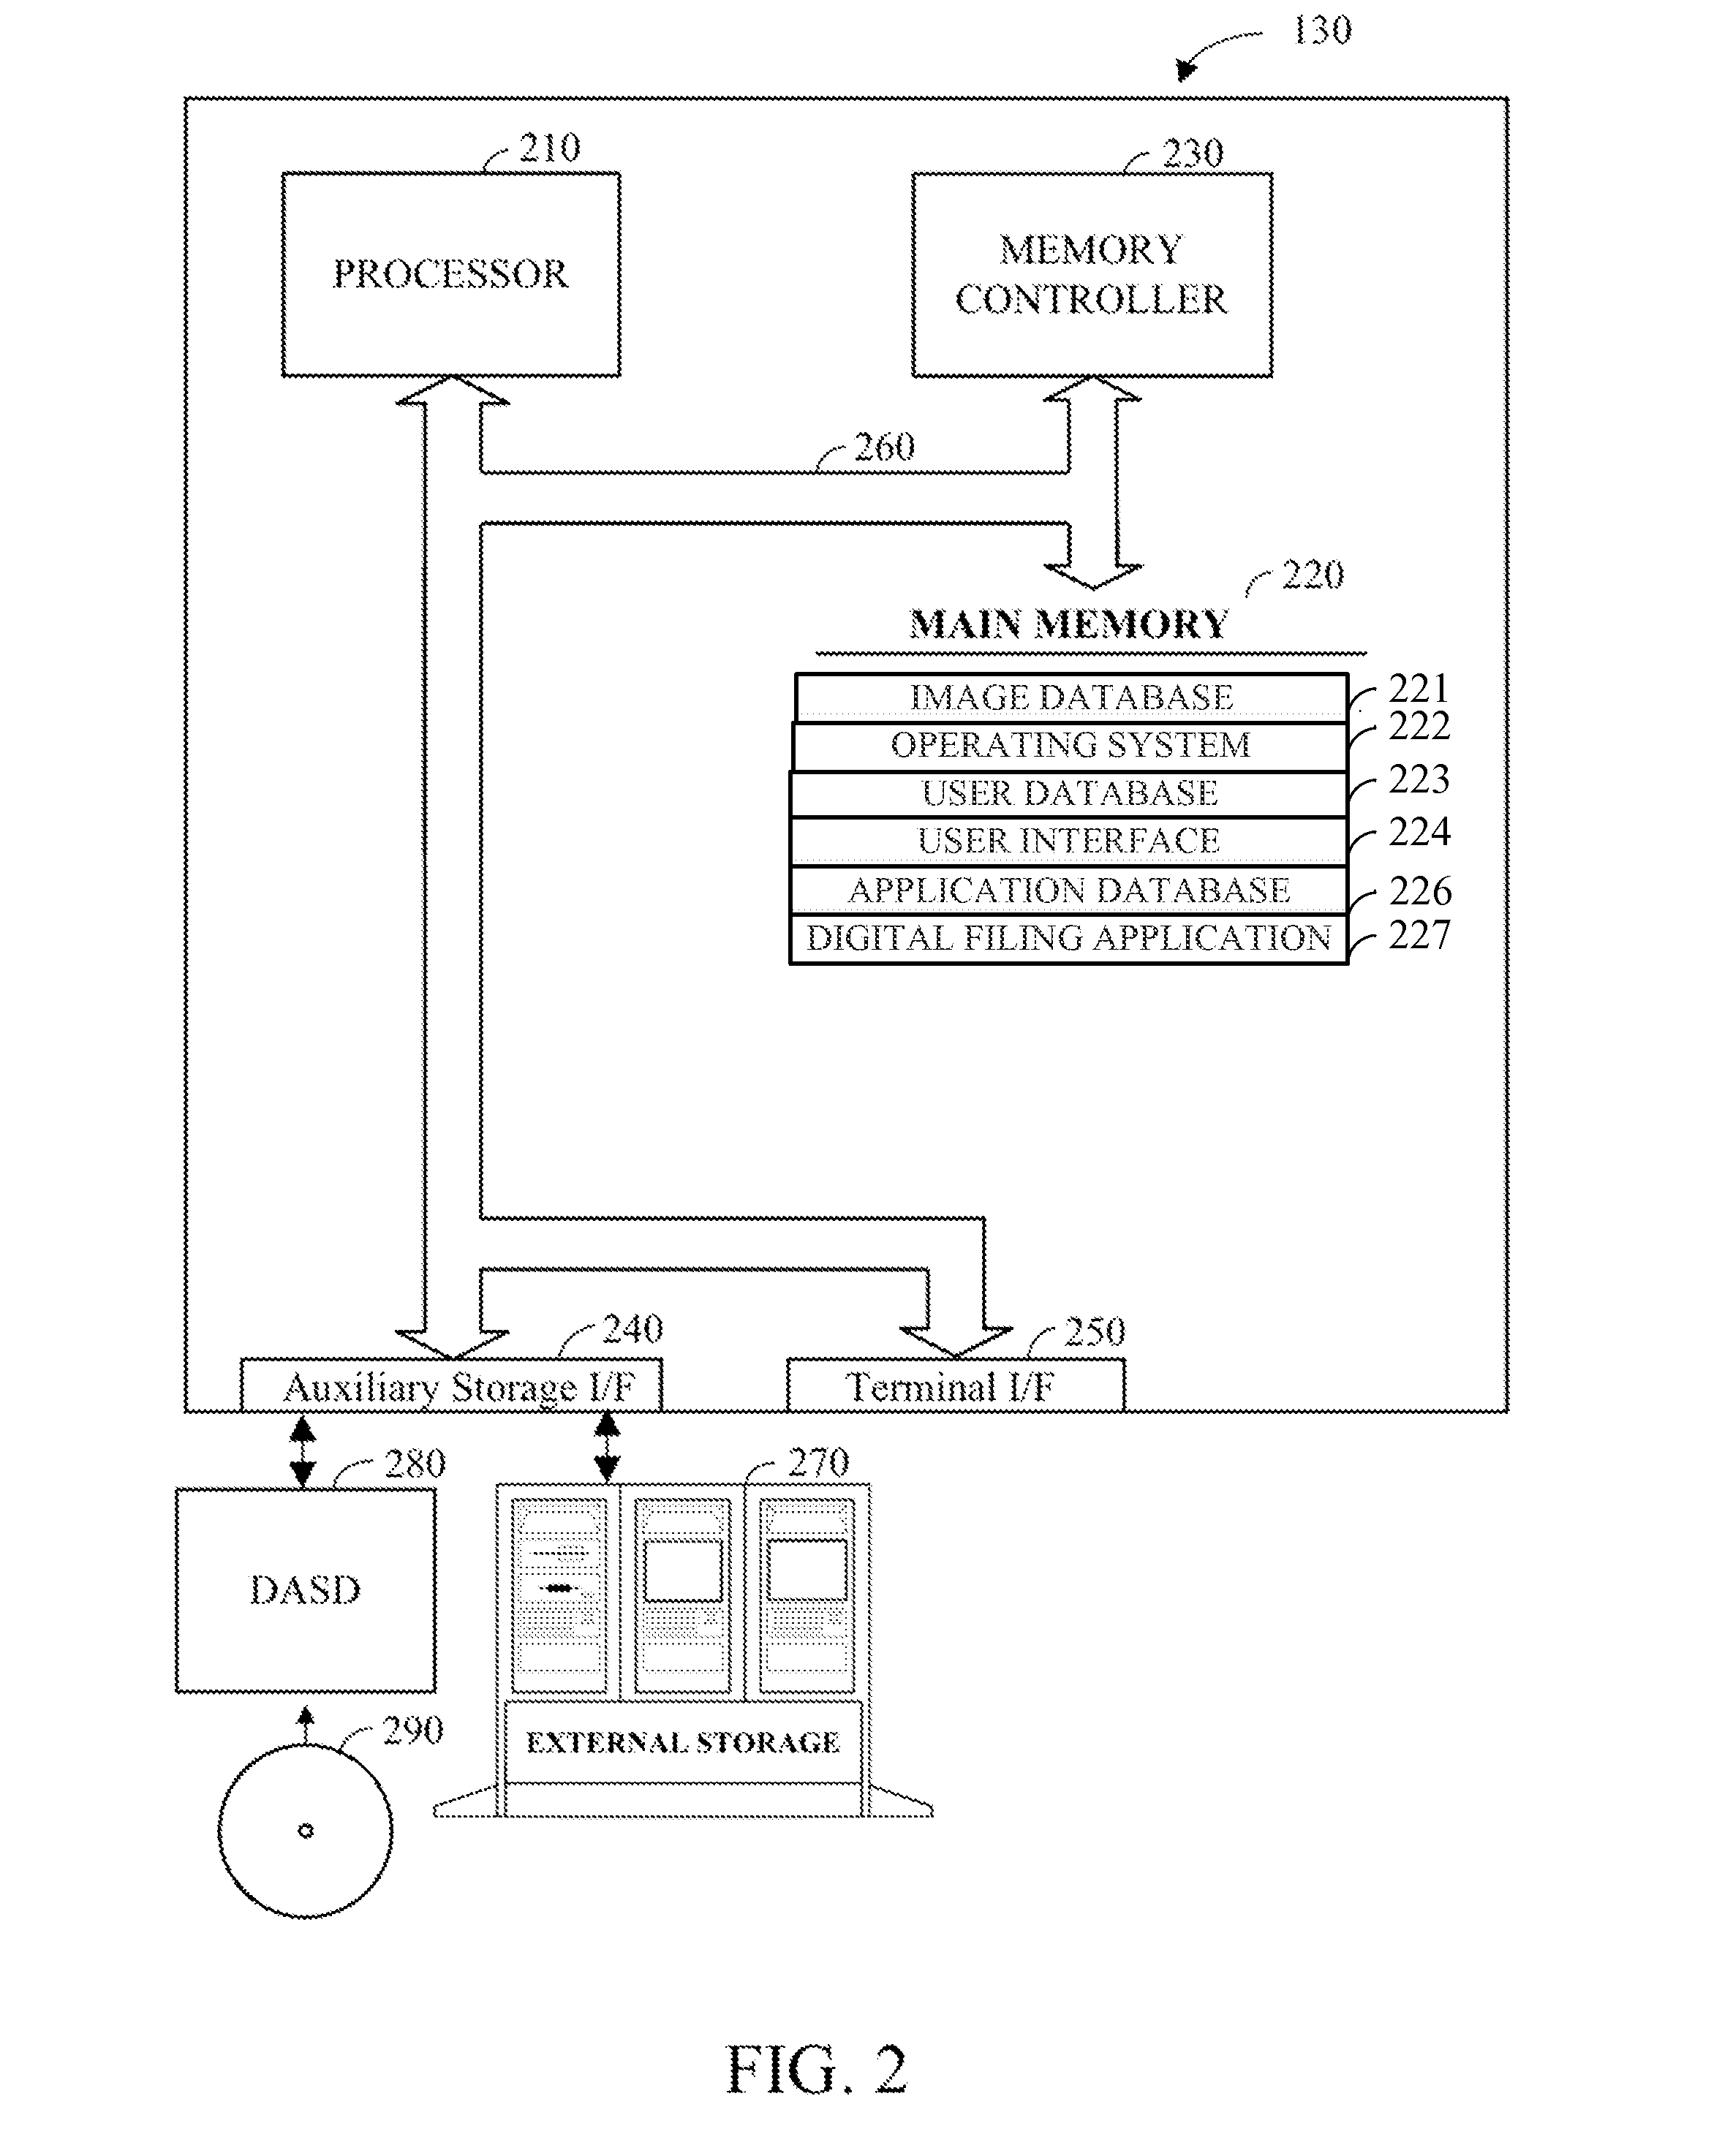 Apparatus and method for automated capture of document metadata and document imaging